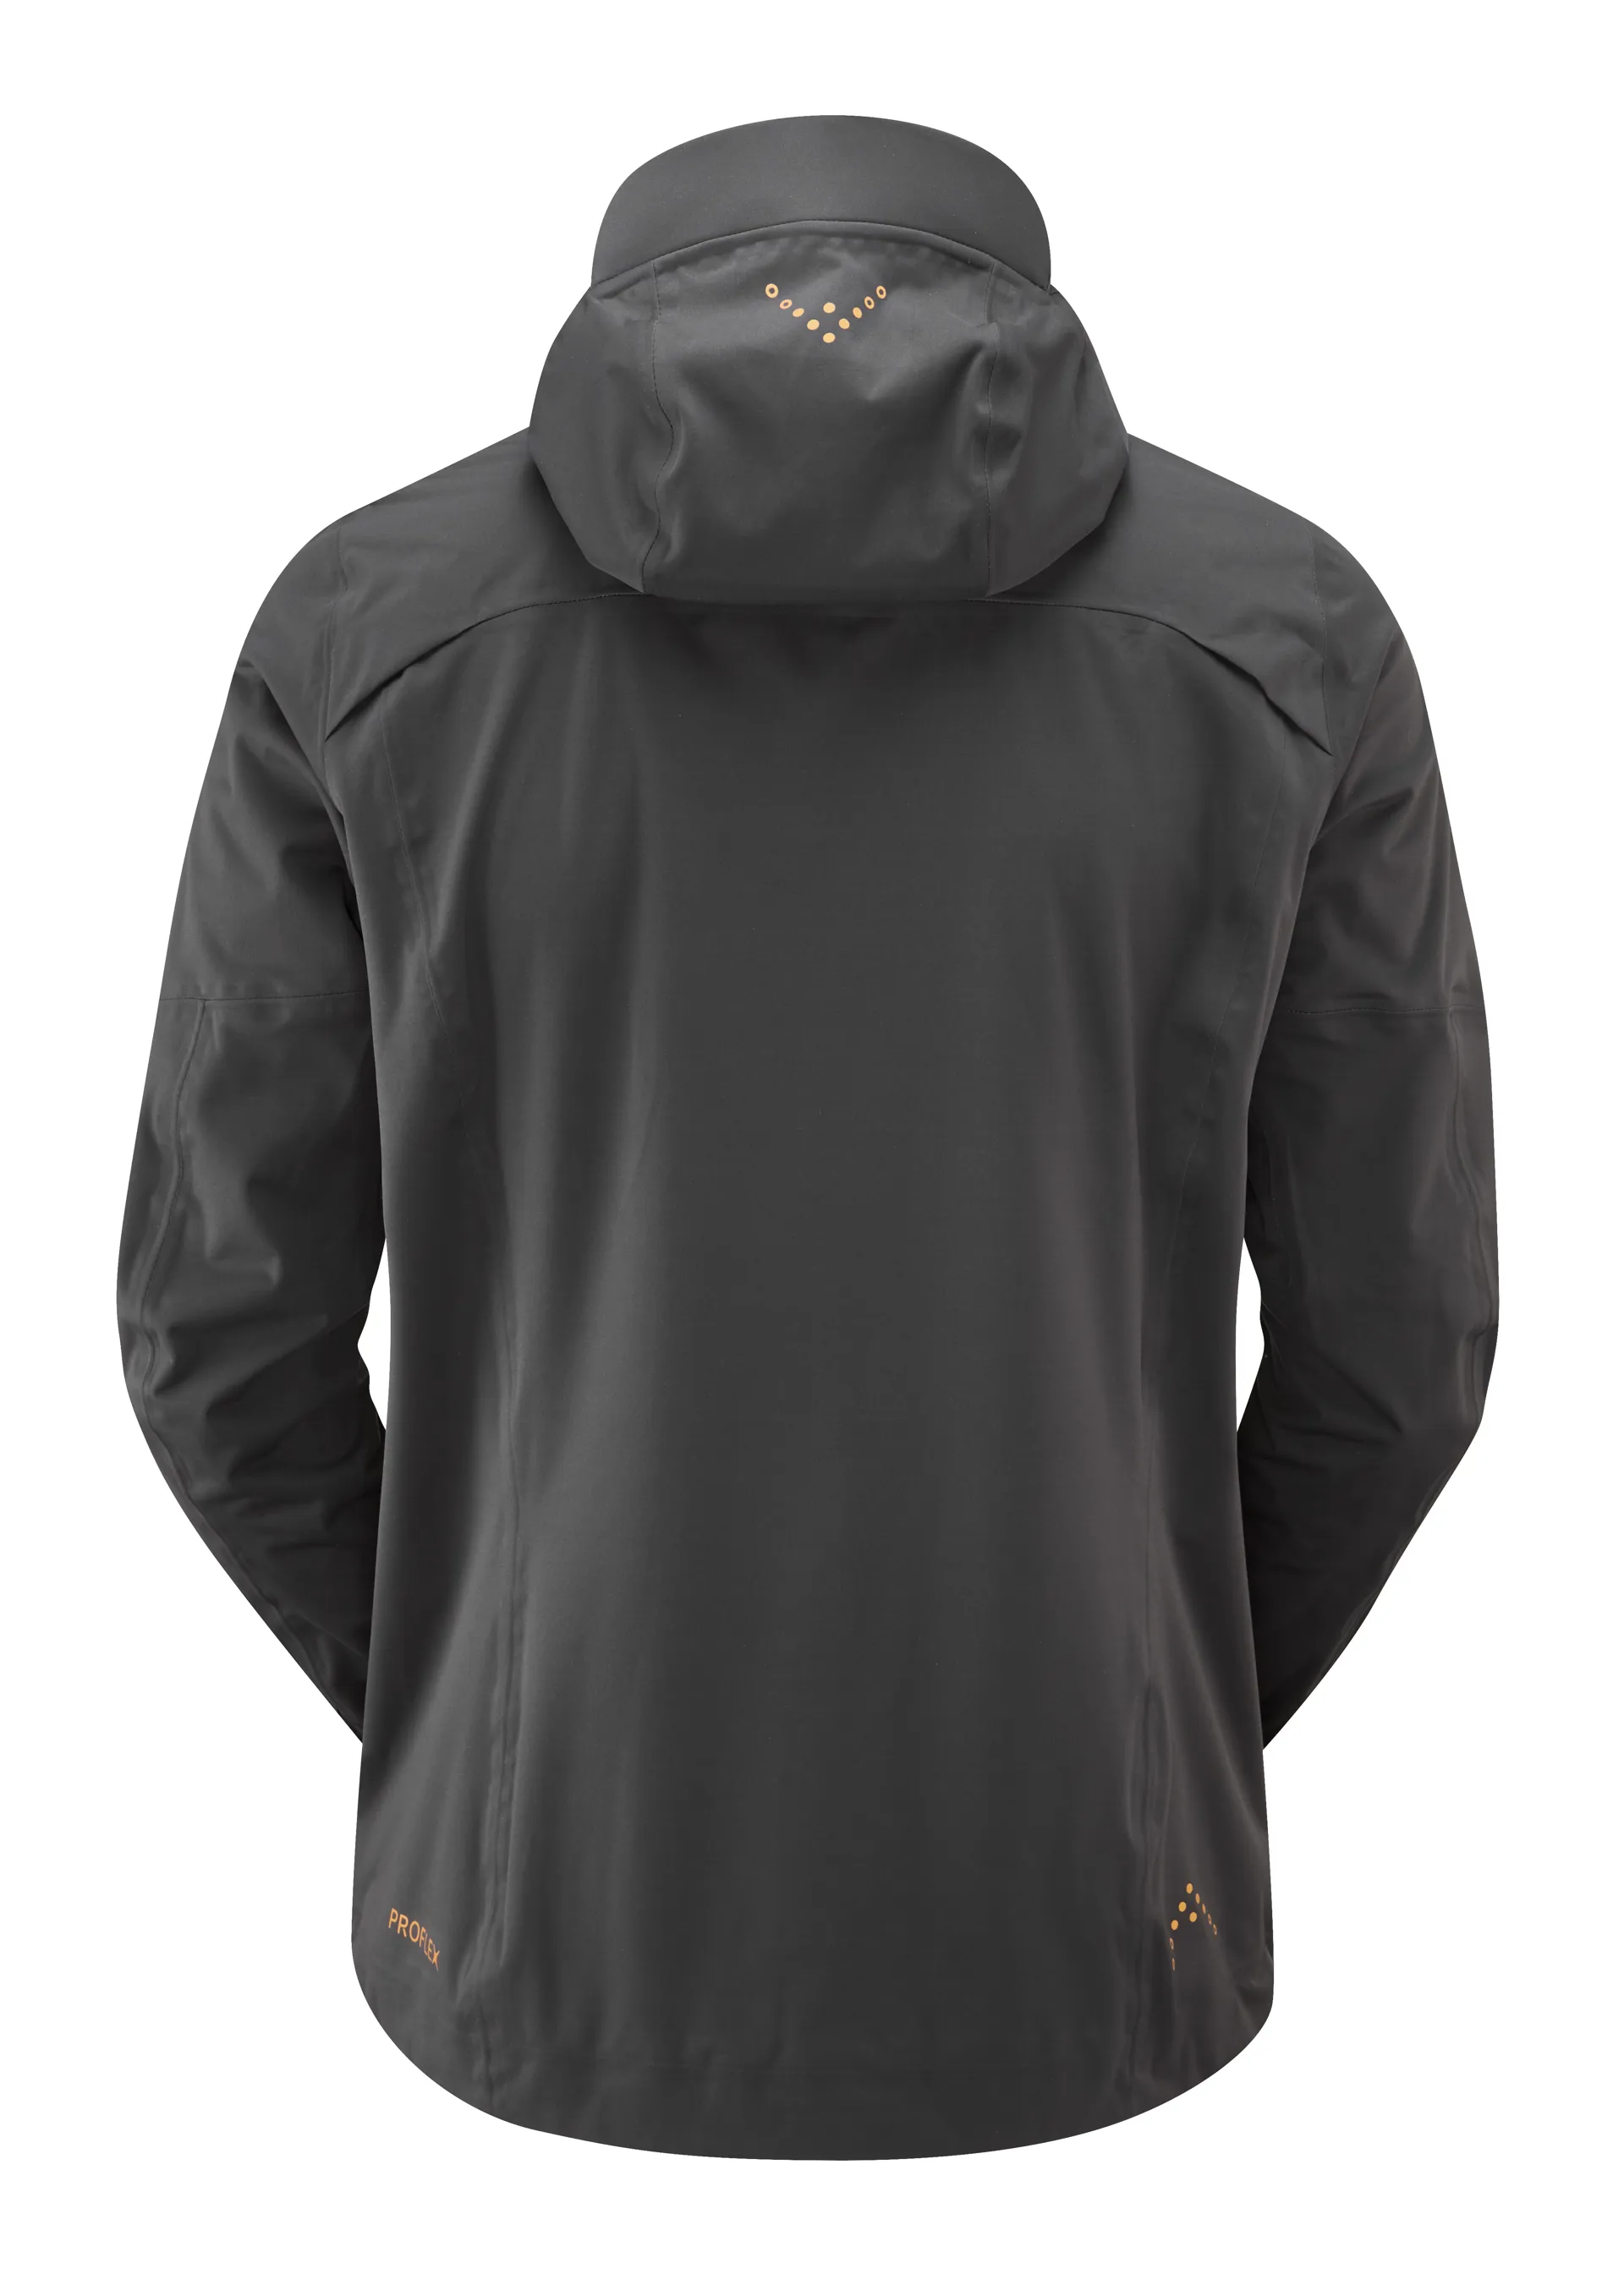 Rab Mens Kinetic Ultra Jacket - Anthracite